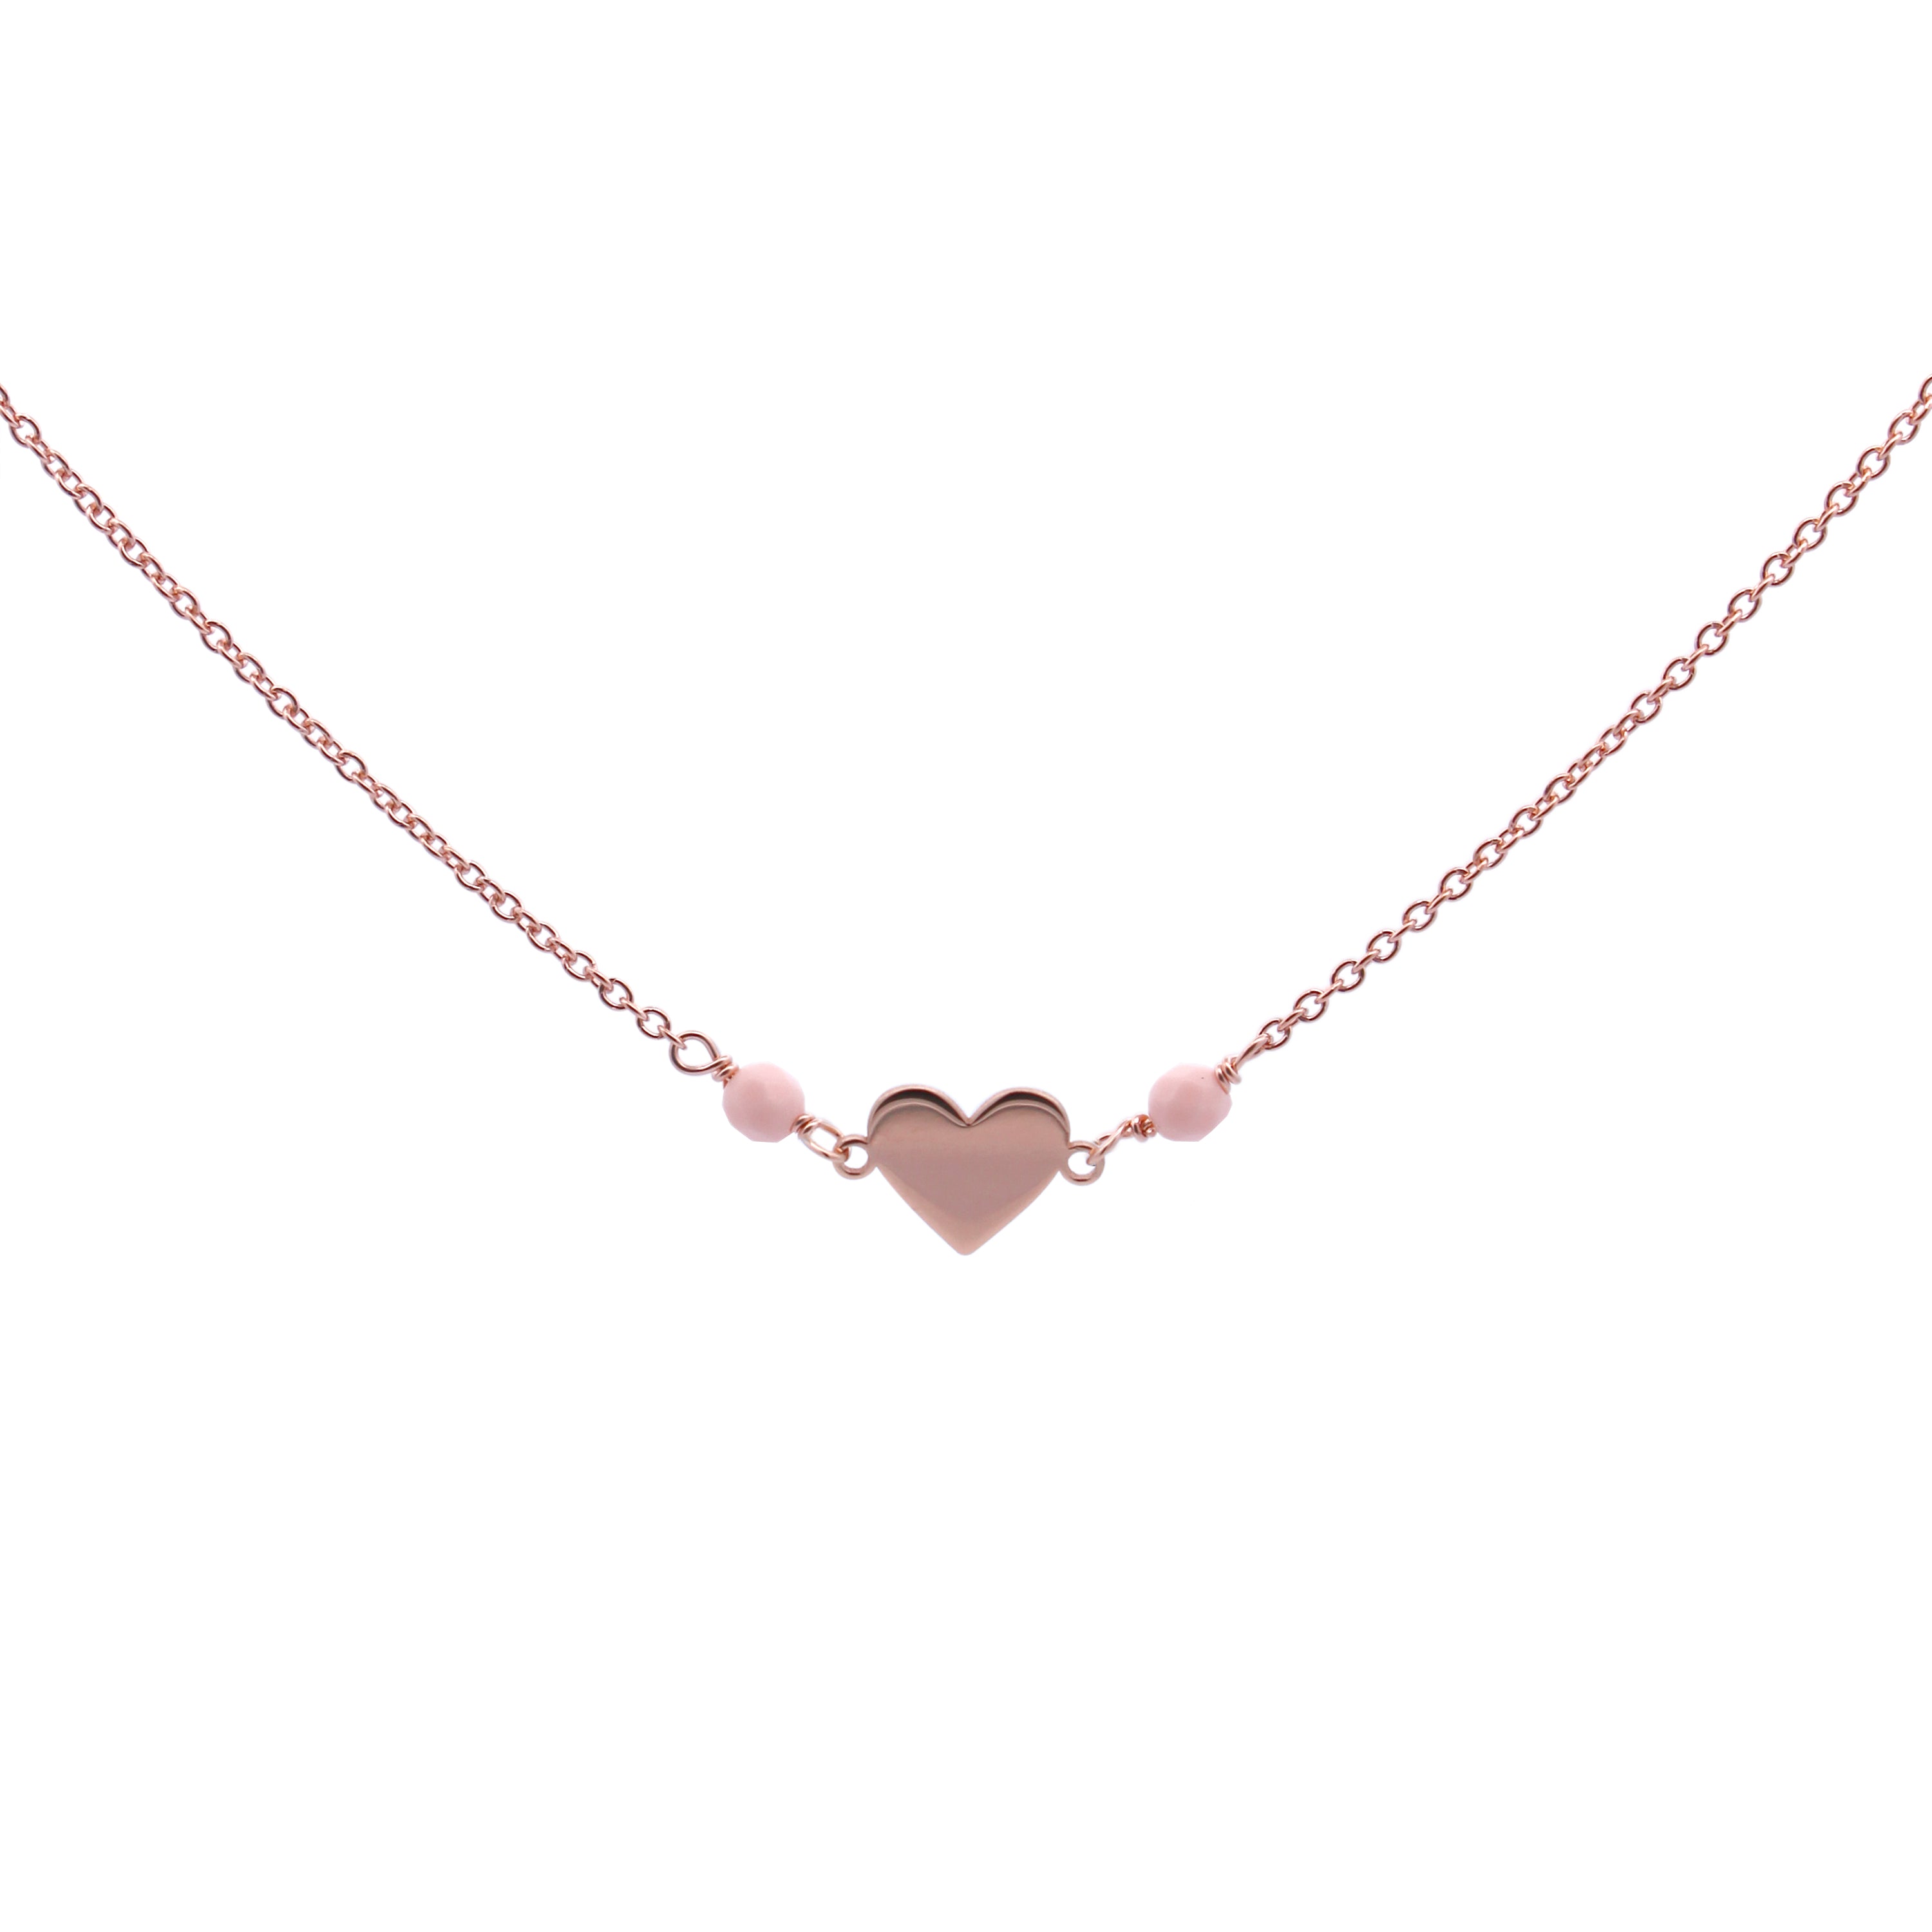 Chokers - Pink Stones Heart Chain Choker - Io&Ro - 1 | Rue des Mille